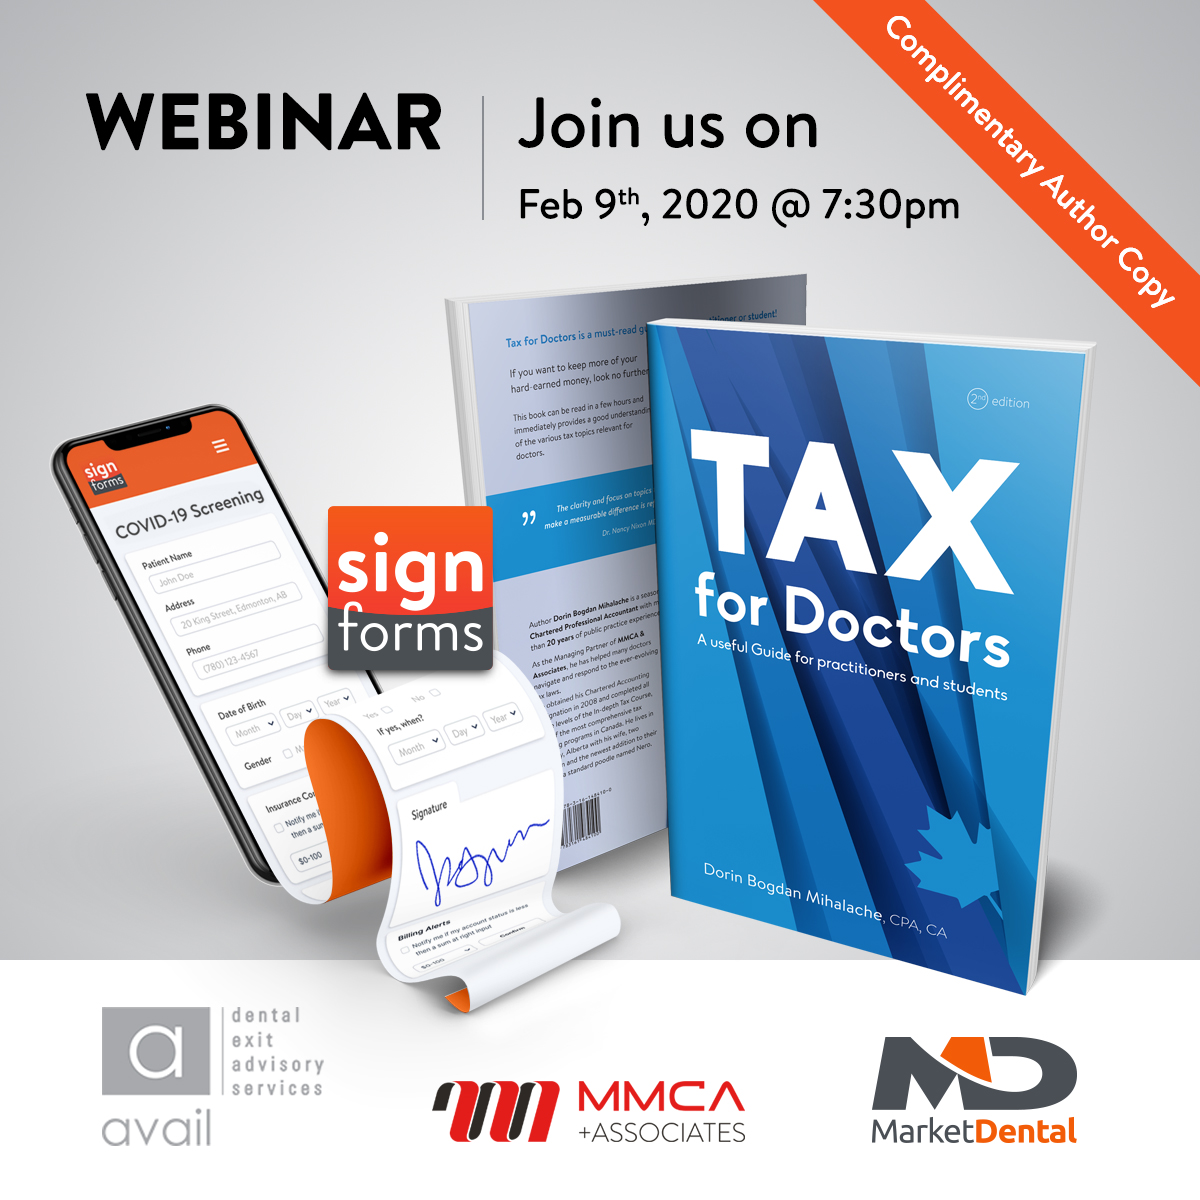 Free Webinar - New book releases Tax for Doctors & SignForms